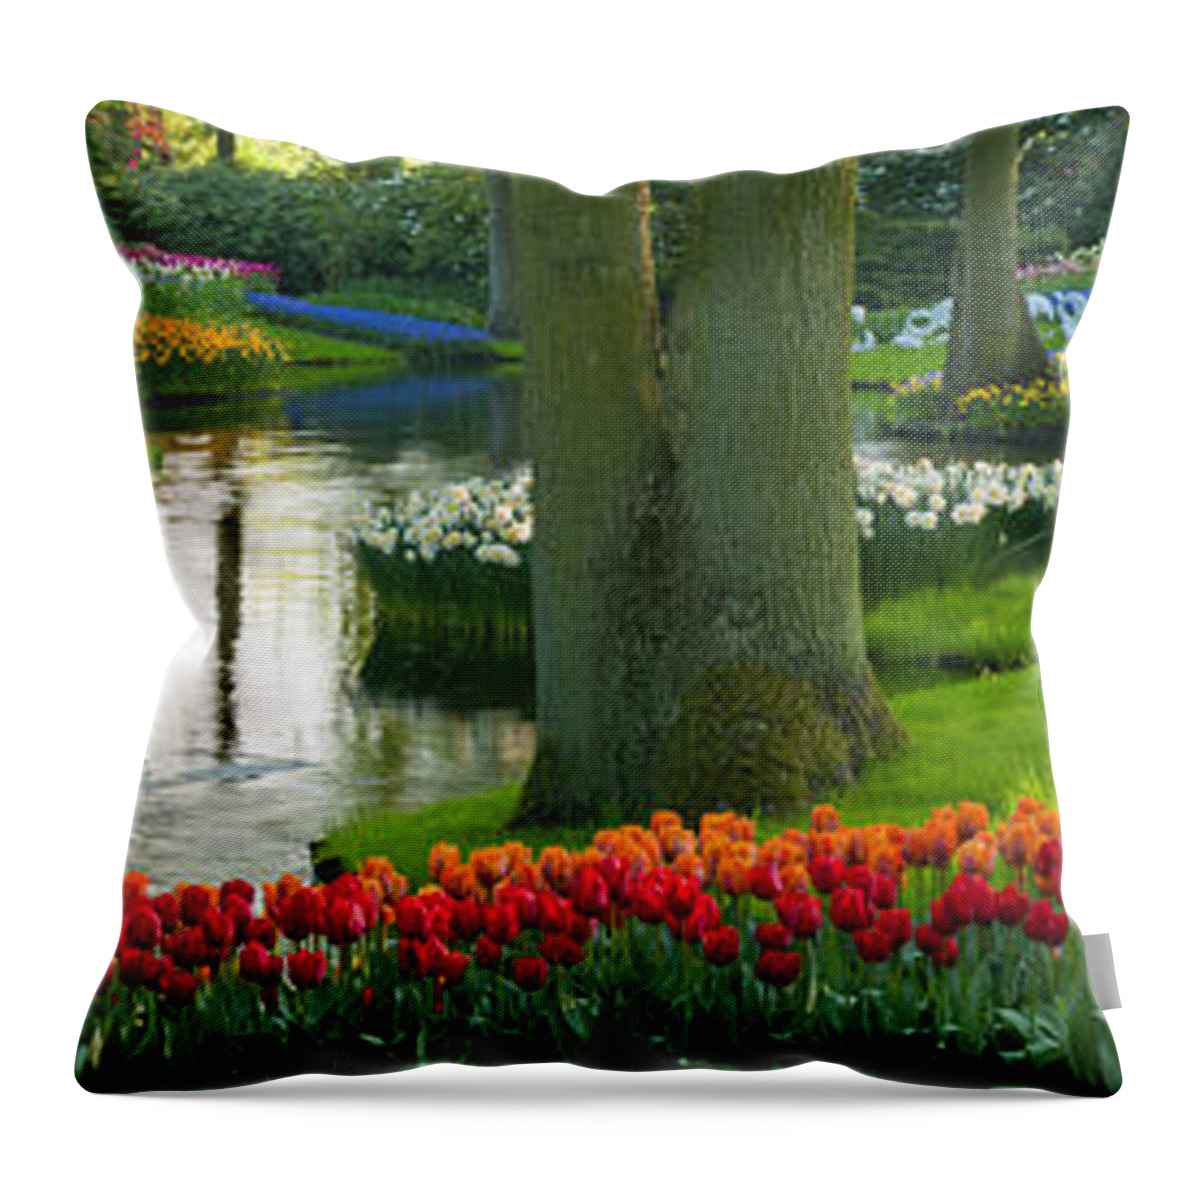 Scenics Throw Pillow featuring the photograph Spring Flowers In A Park by Jacobh